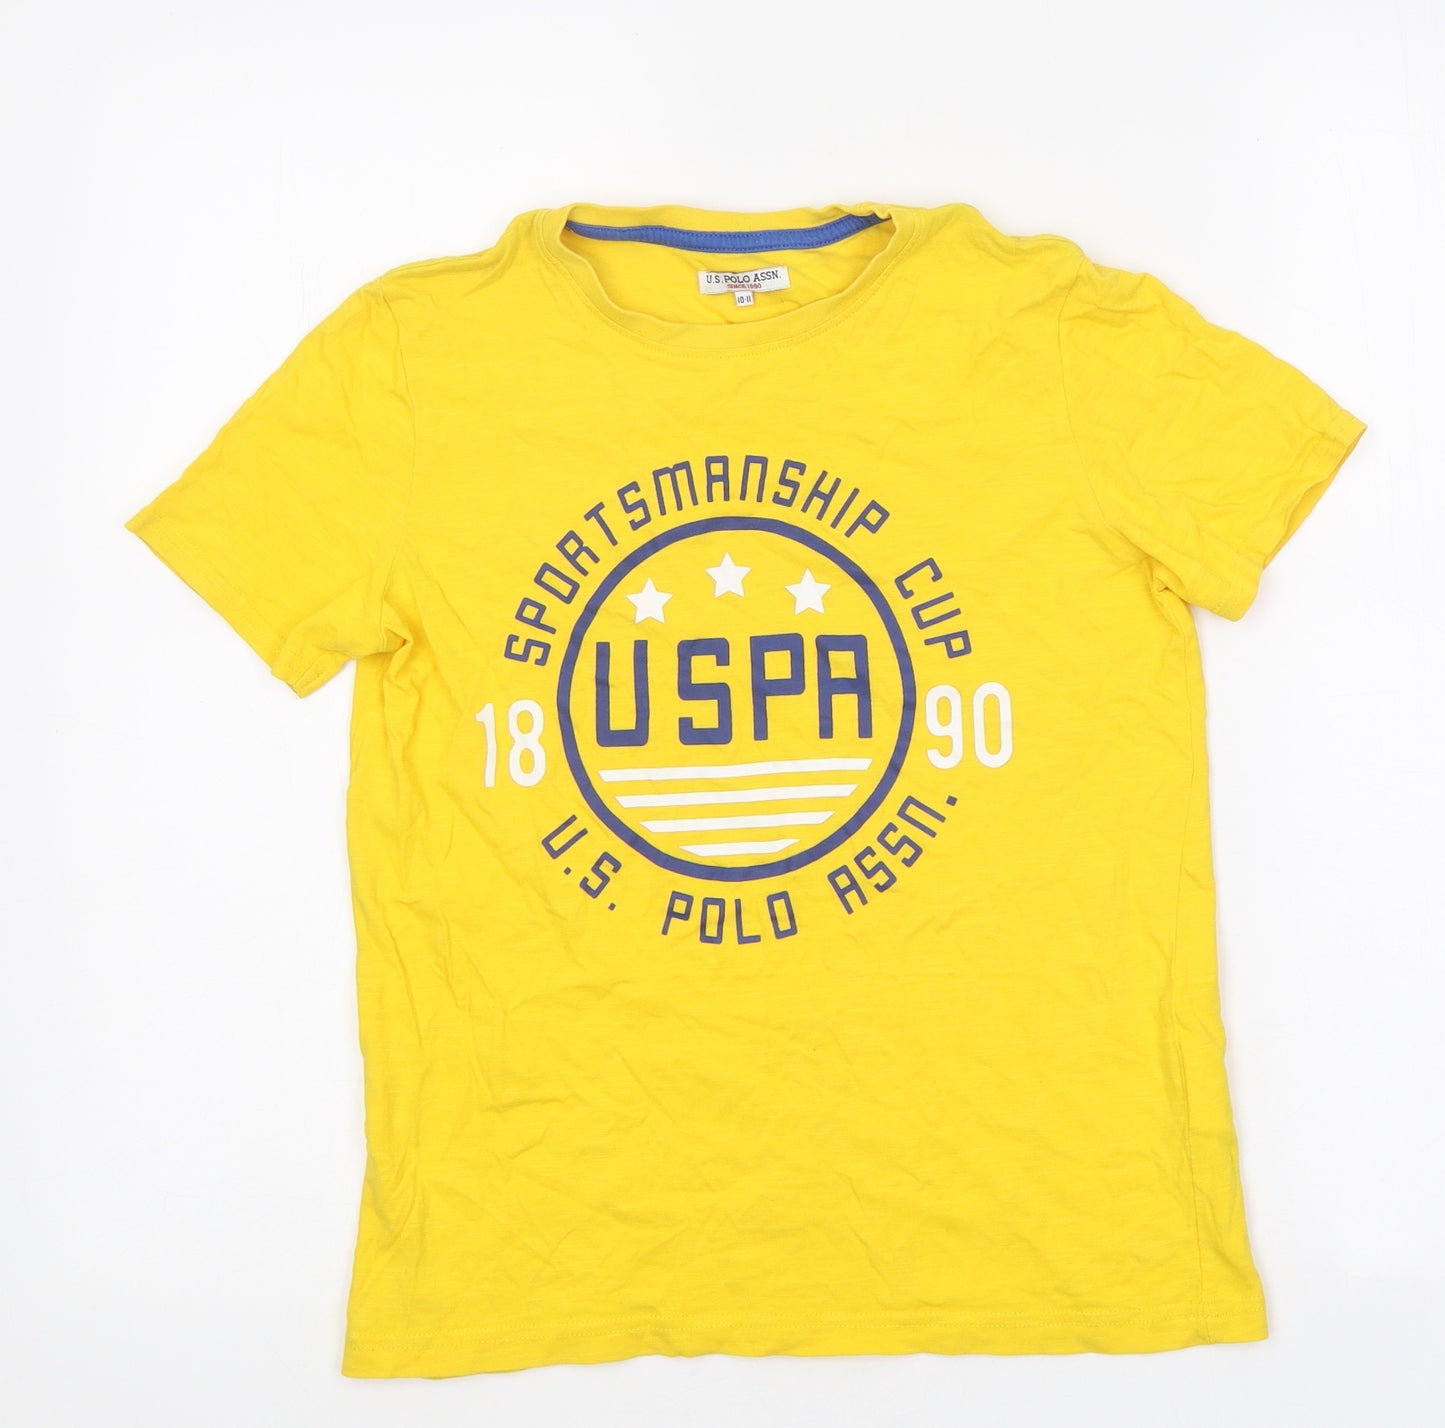 US Polo Assn. Boys Yellow Cotton Jersey T-Shirt Size 10-11 Years Round Neck Pullover